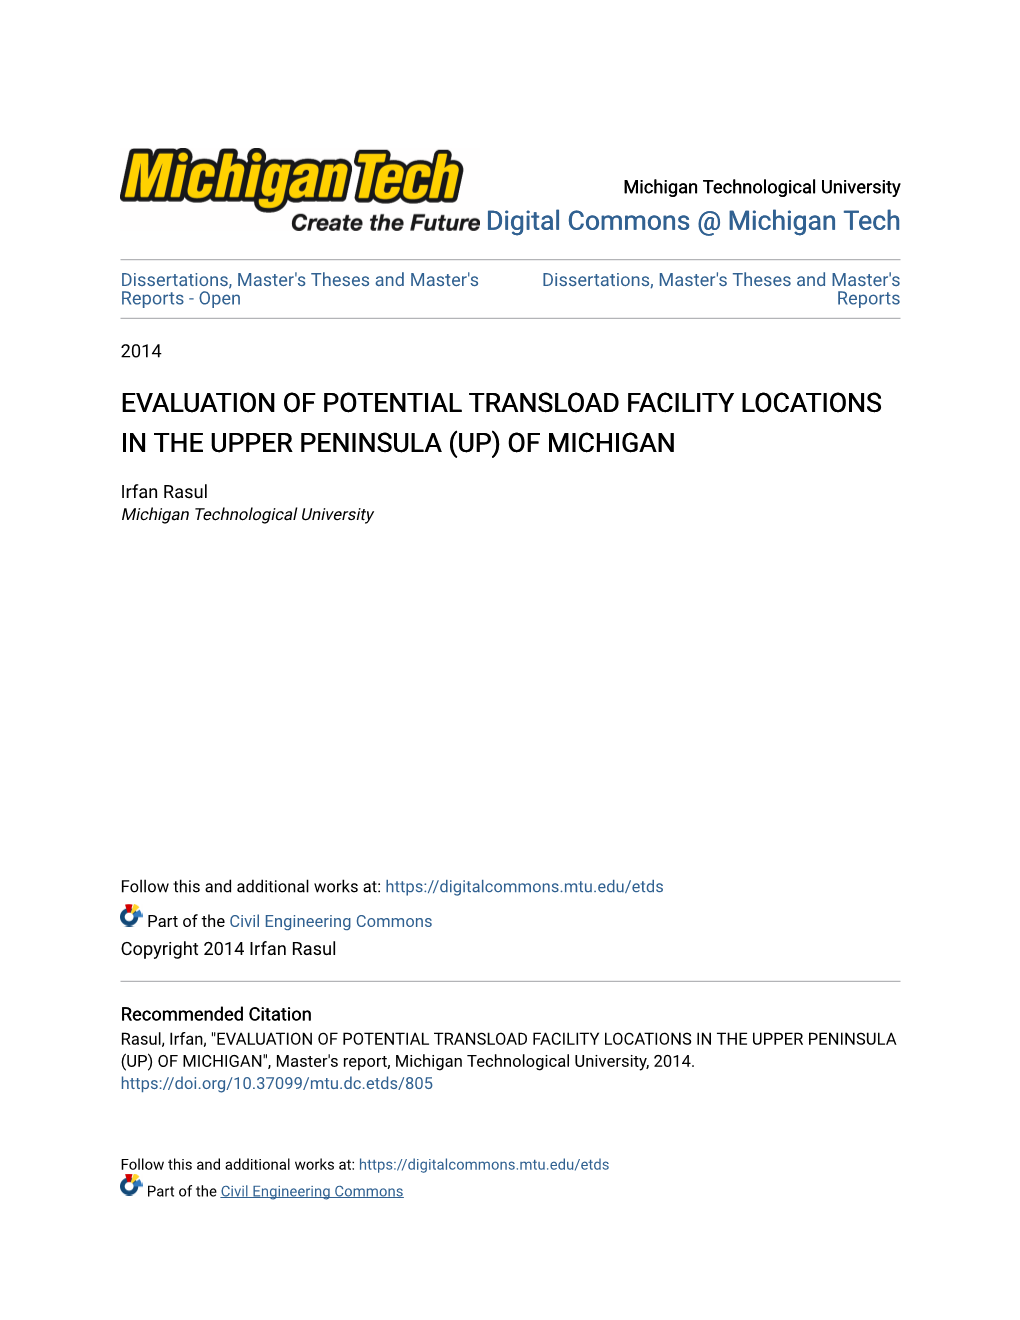 Evaluation of Potential Transload Facility Locations in the Upper Peninsula (Up) of Michigan